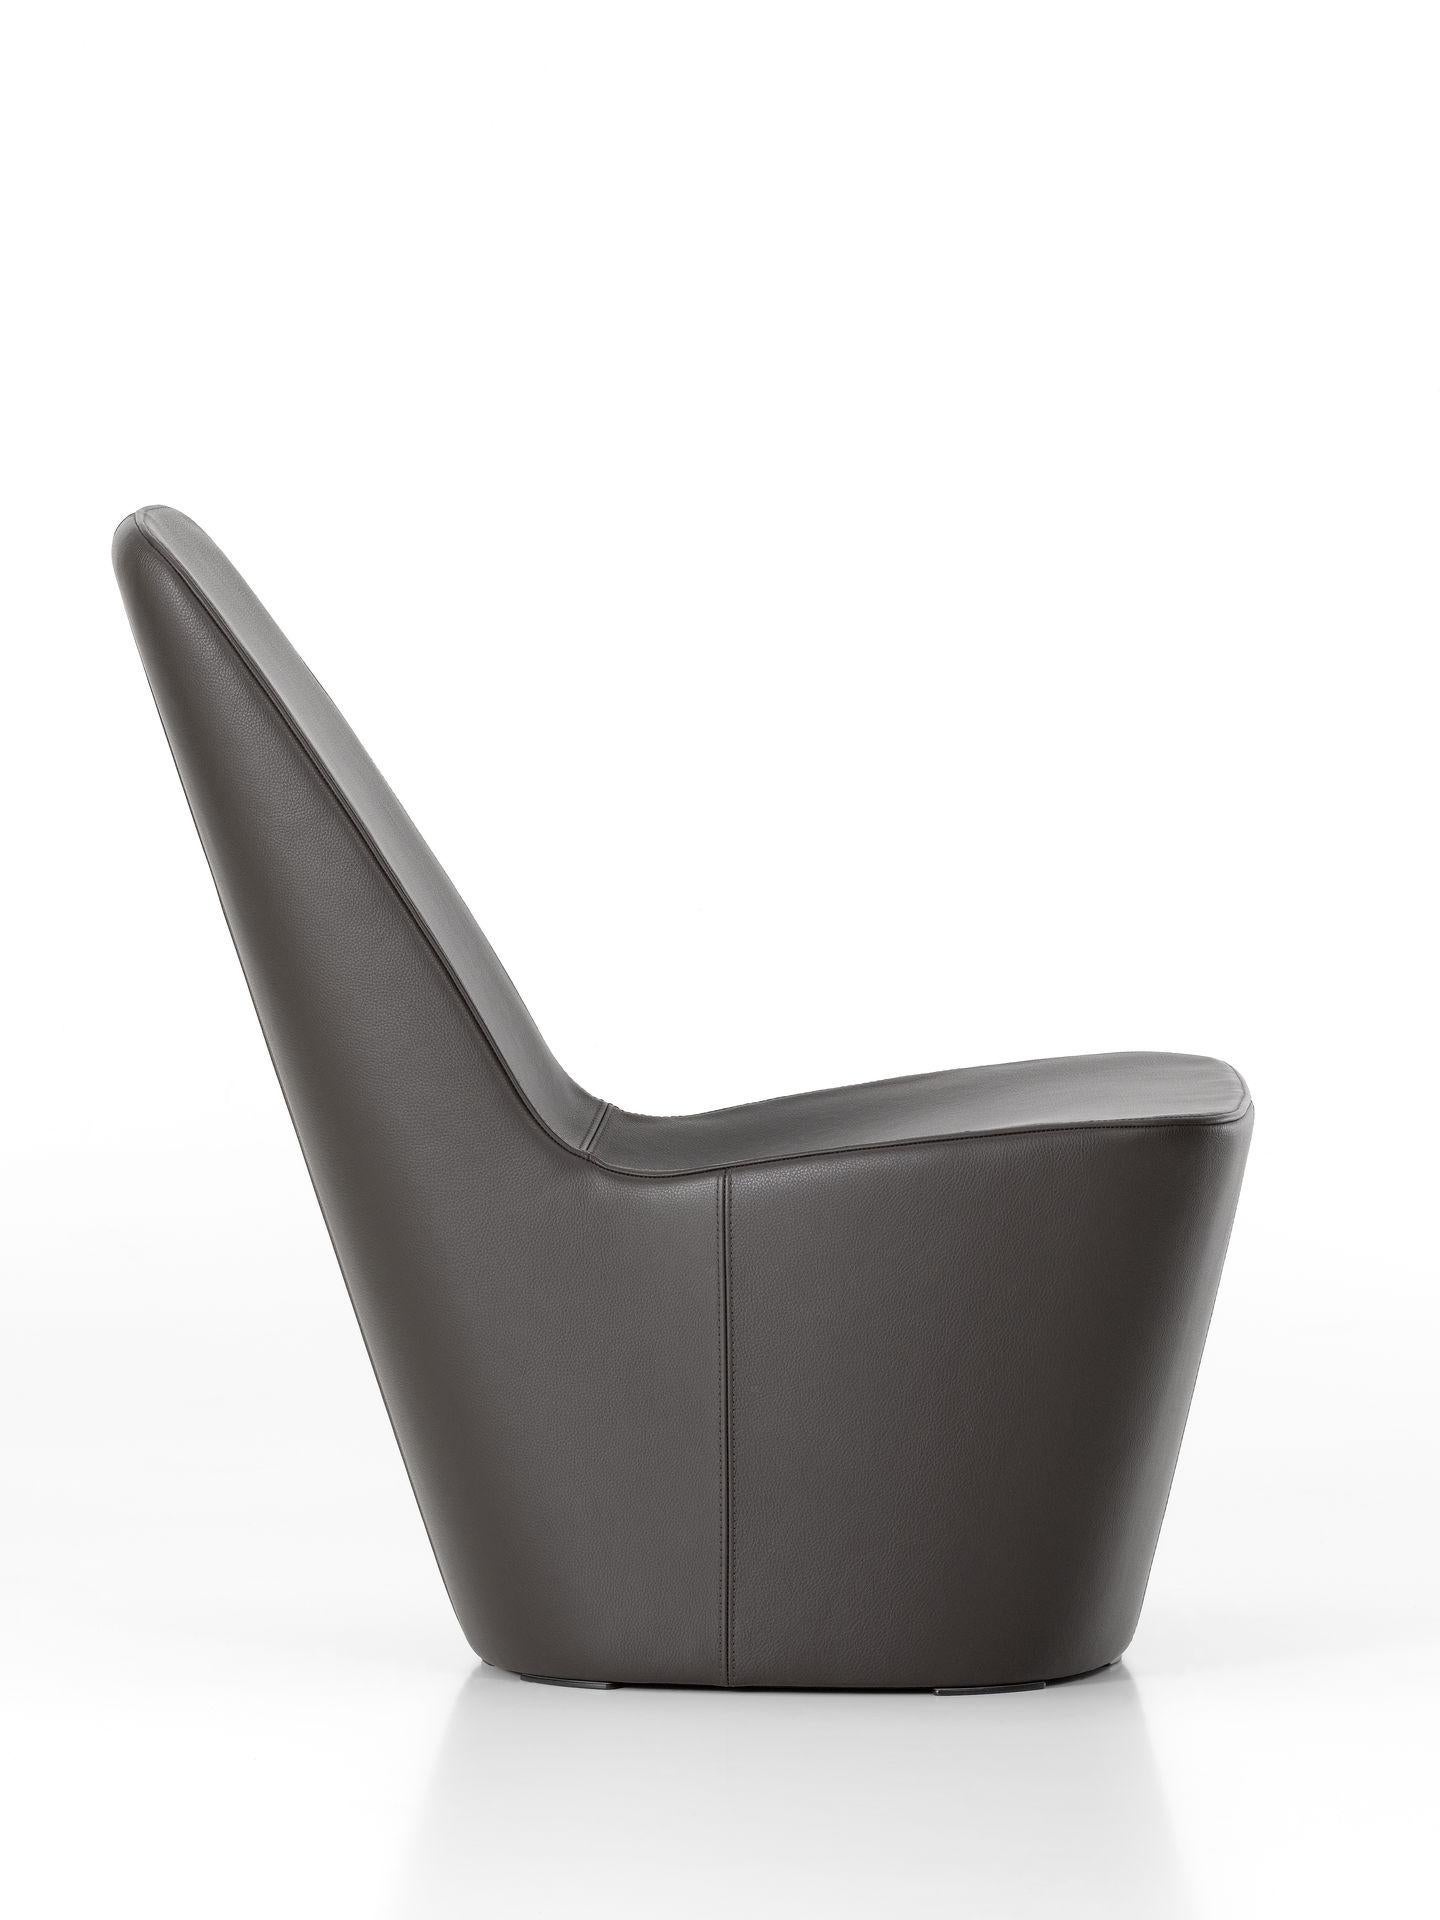 Sculptural chair designed by Jasper Morrison in 2008.
Manufactured by Vitra, Switzerland.

Monopod, the compact sculptural visitor chair by Jasper Morrison, is a perfect companion for sofas and larger armchairs in different interiors and spaces.